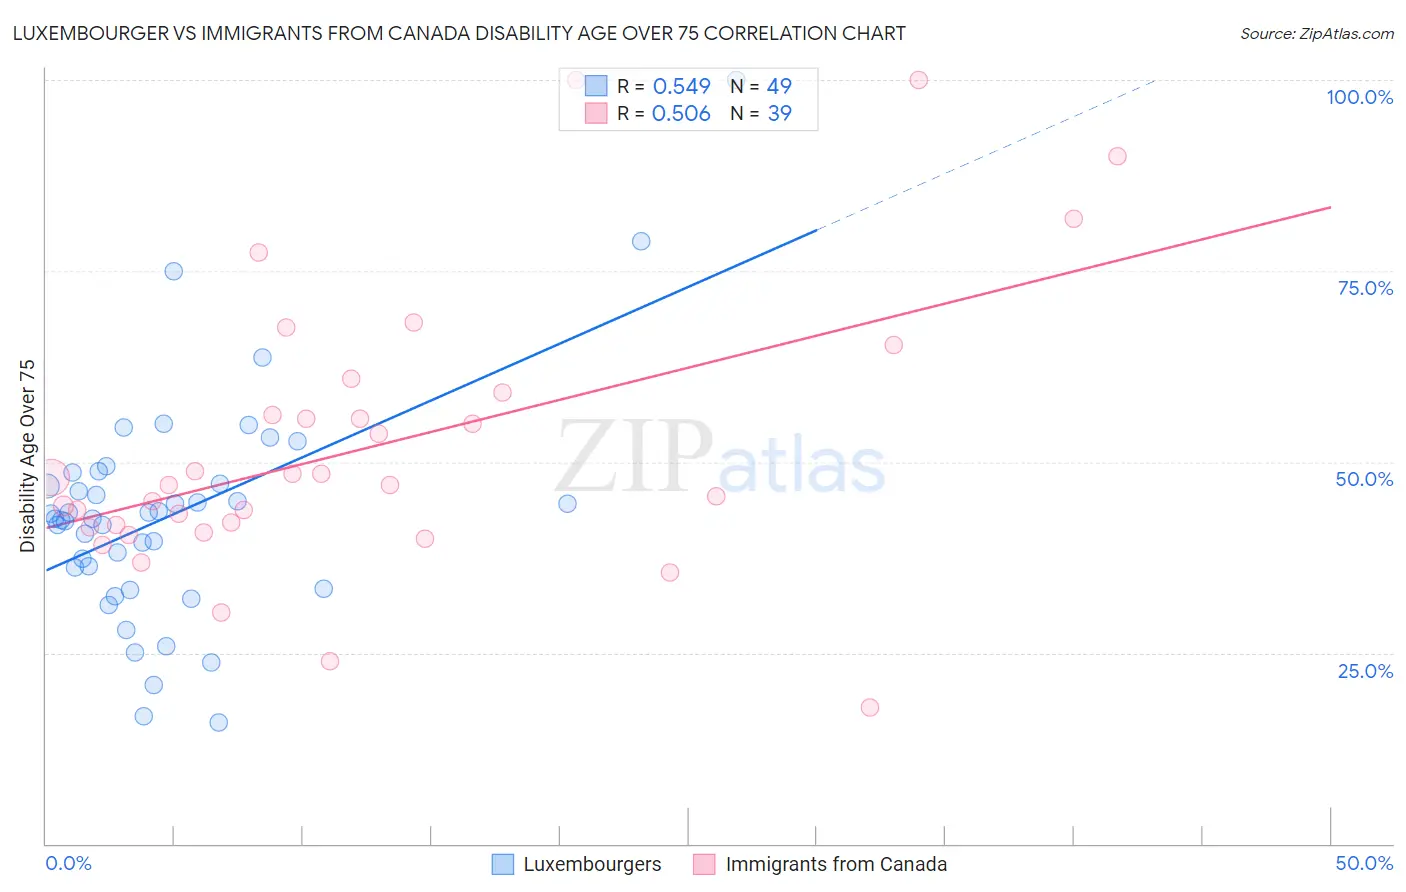 Luxembourger vs Immigrants from Canada Disability Age Over 75